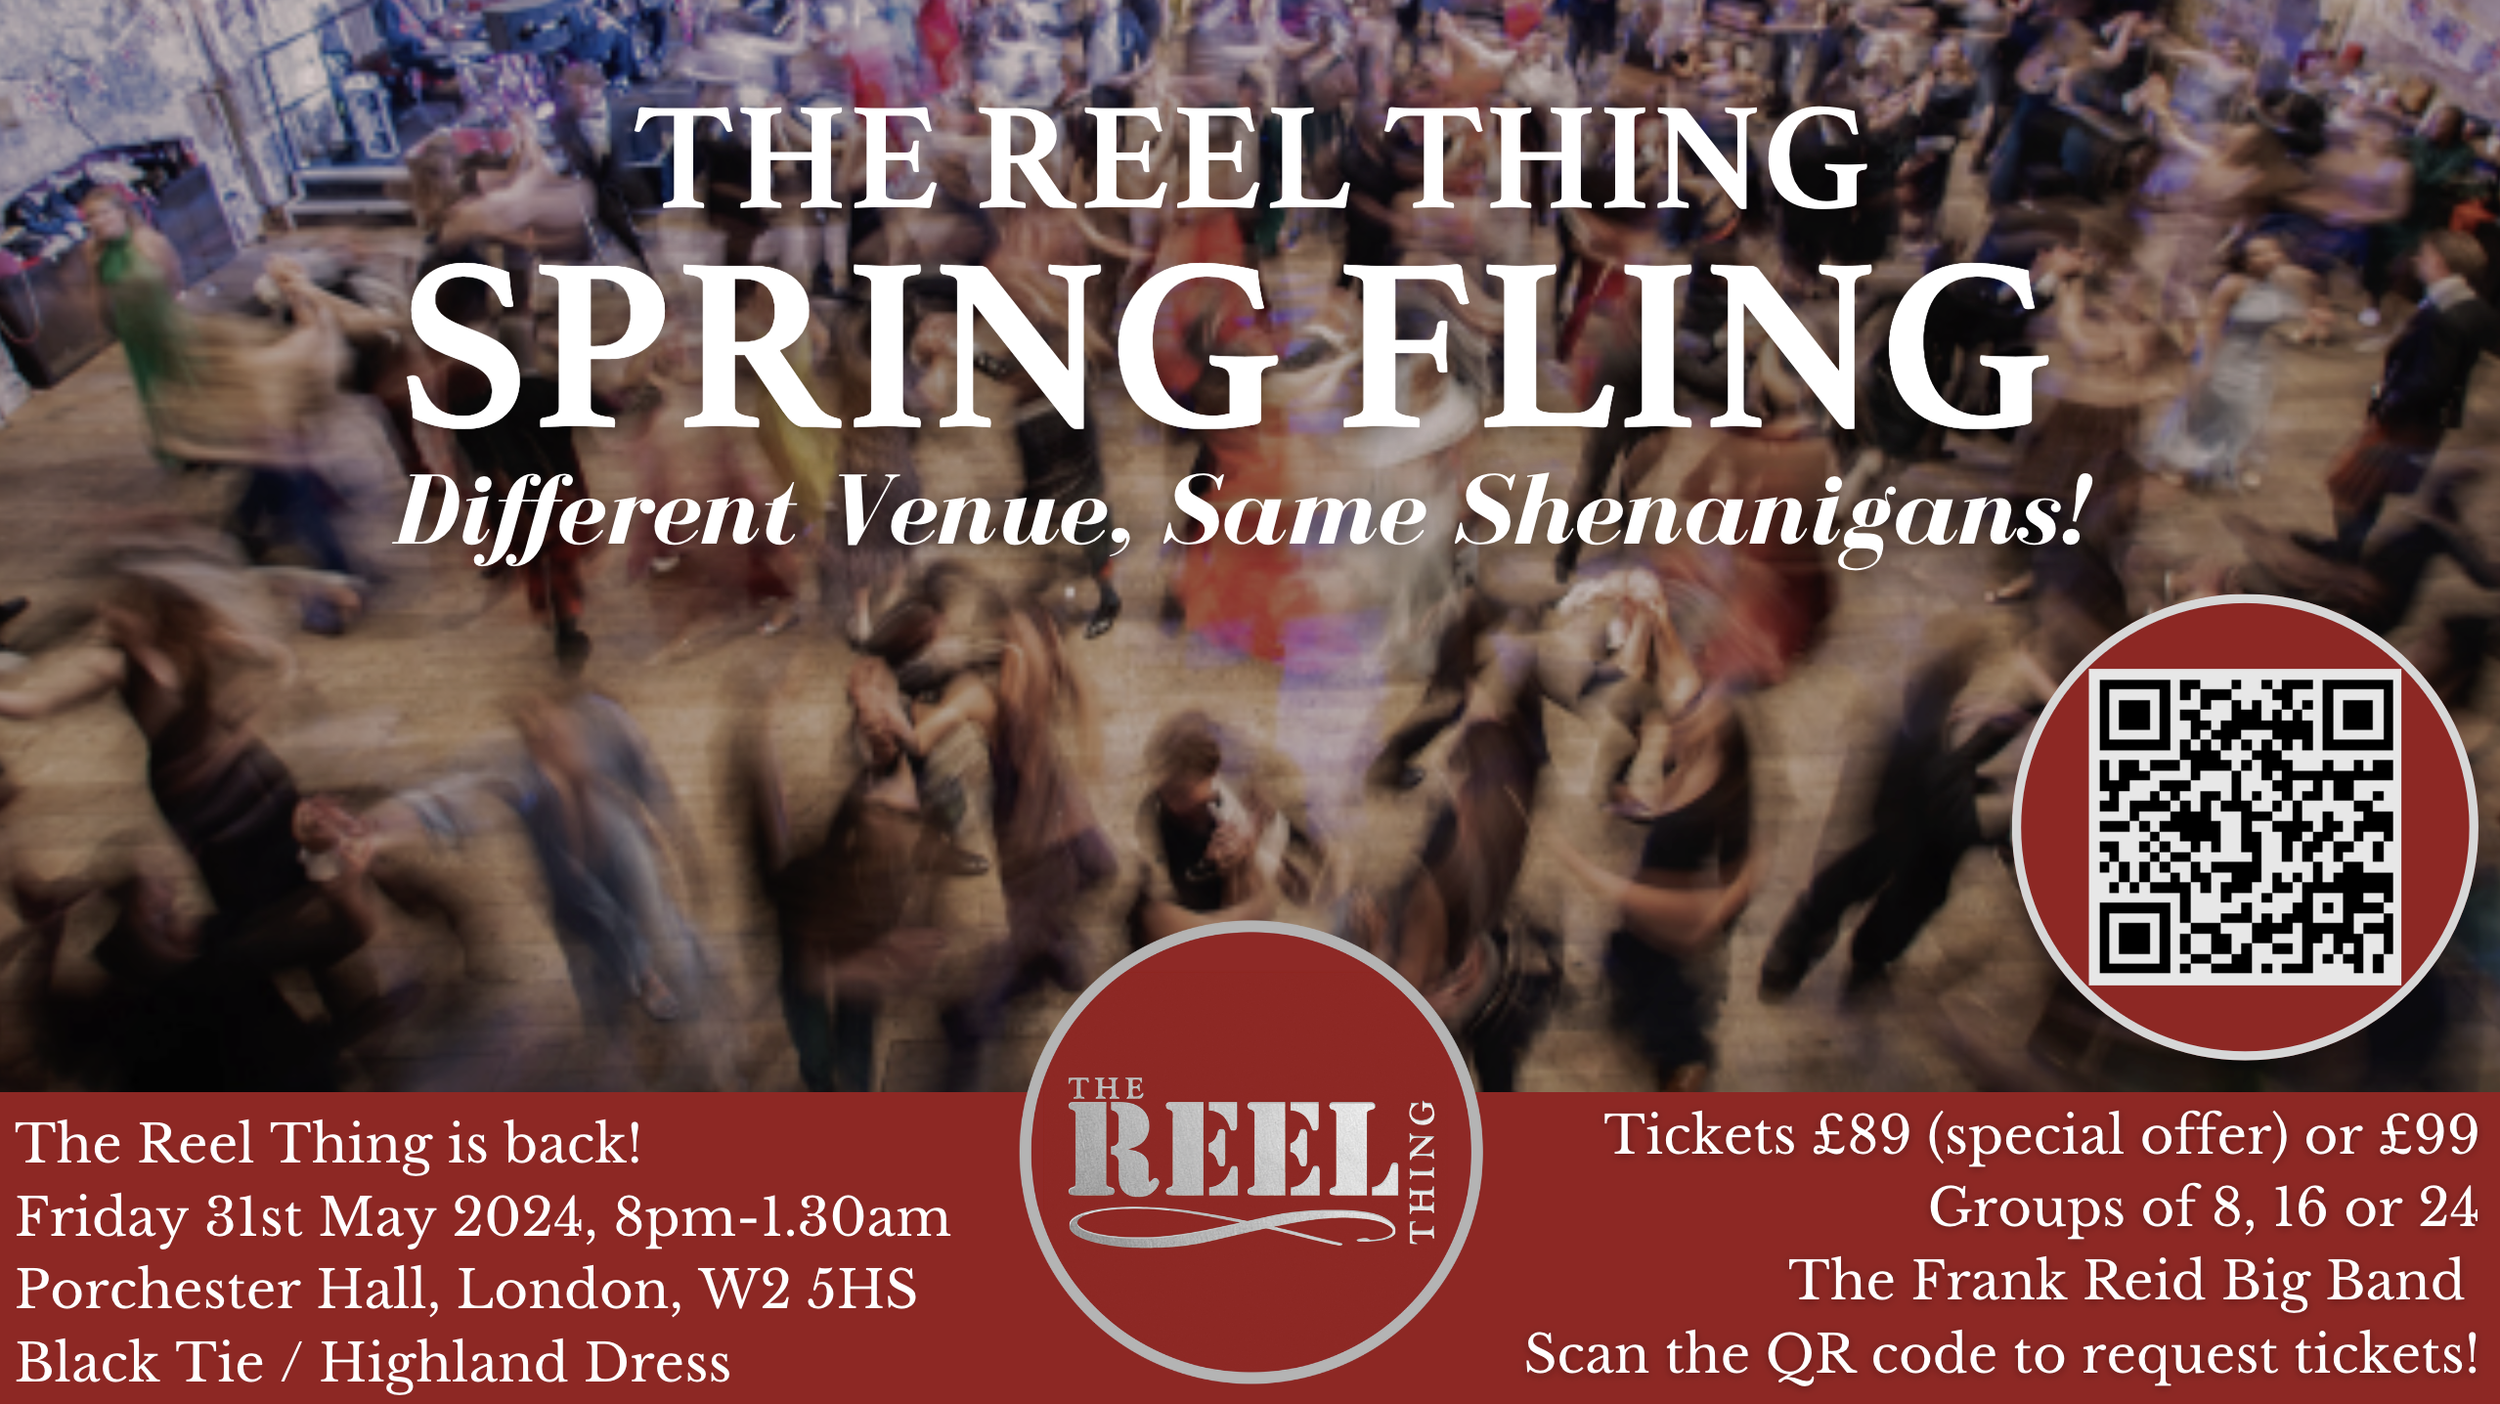 THE REEL THING SPRING FLING @ PORCHESTER HALL (LONDON) — Reel Thing Balls &  Events